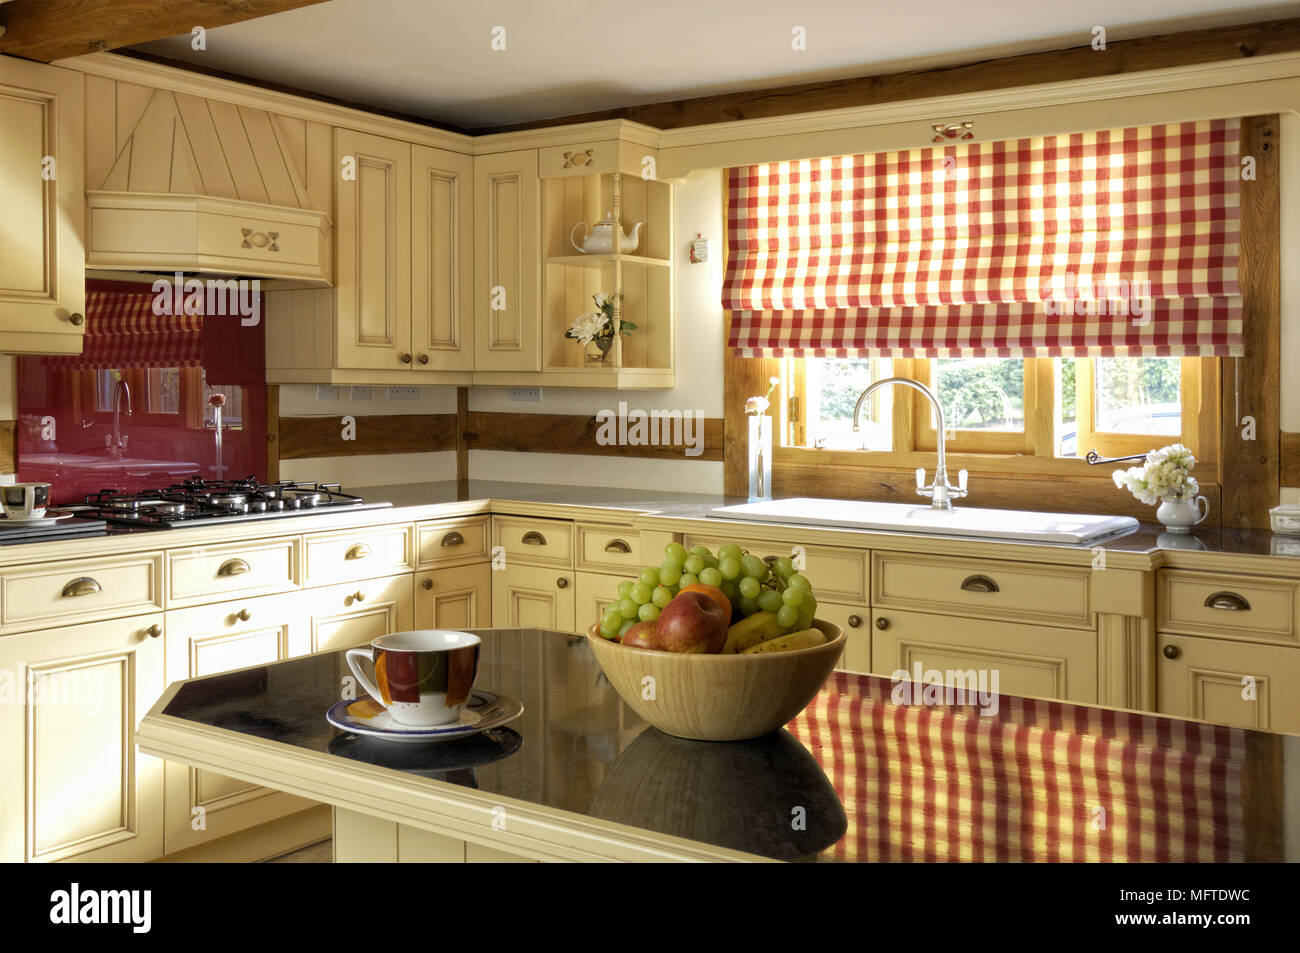 Modern country style kitchen with red check patterned roman blind at window Stock Photo